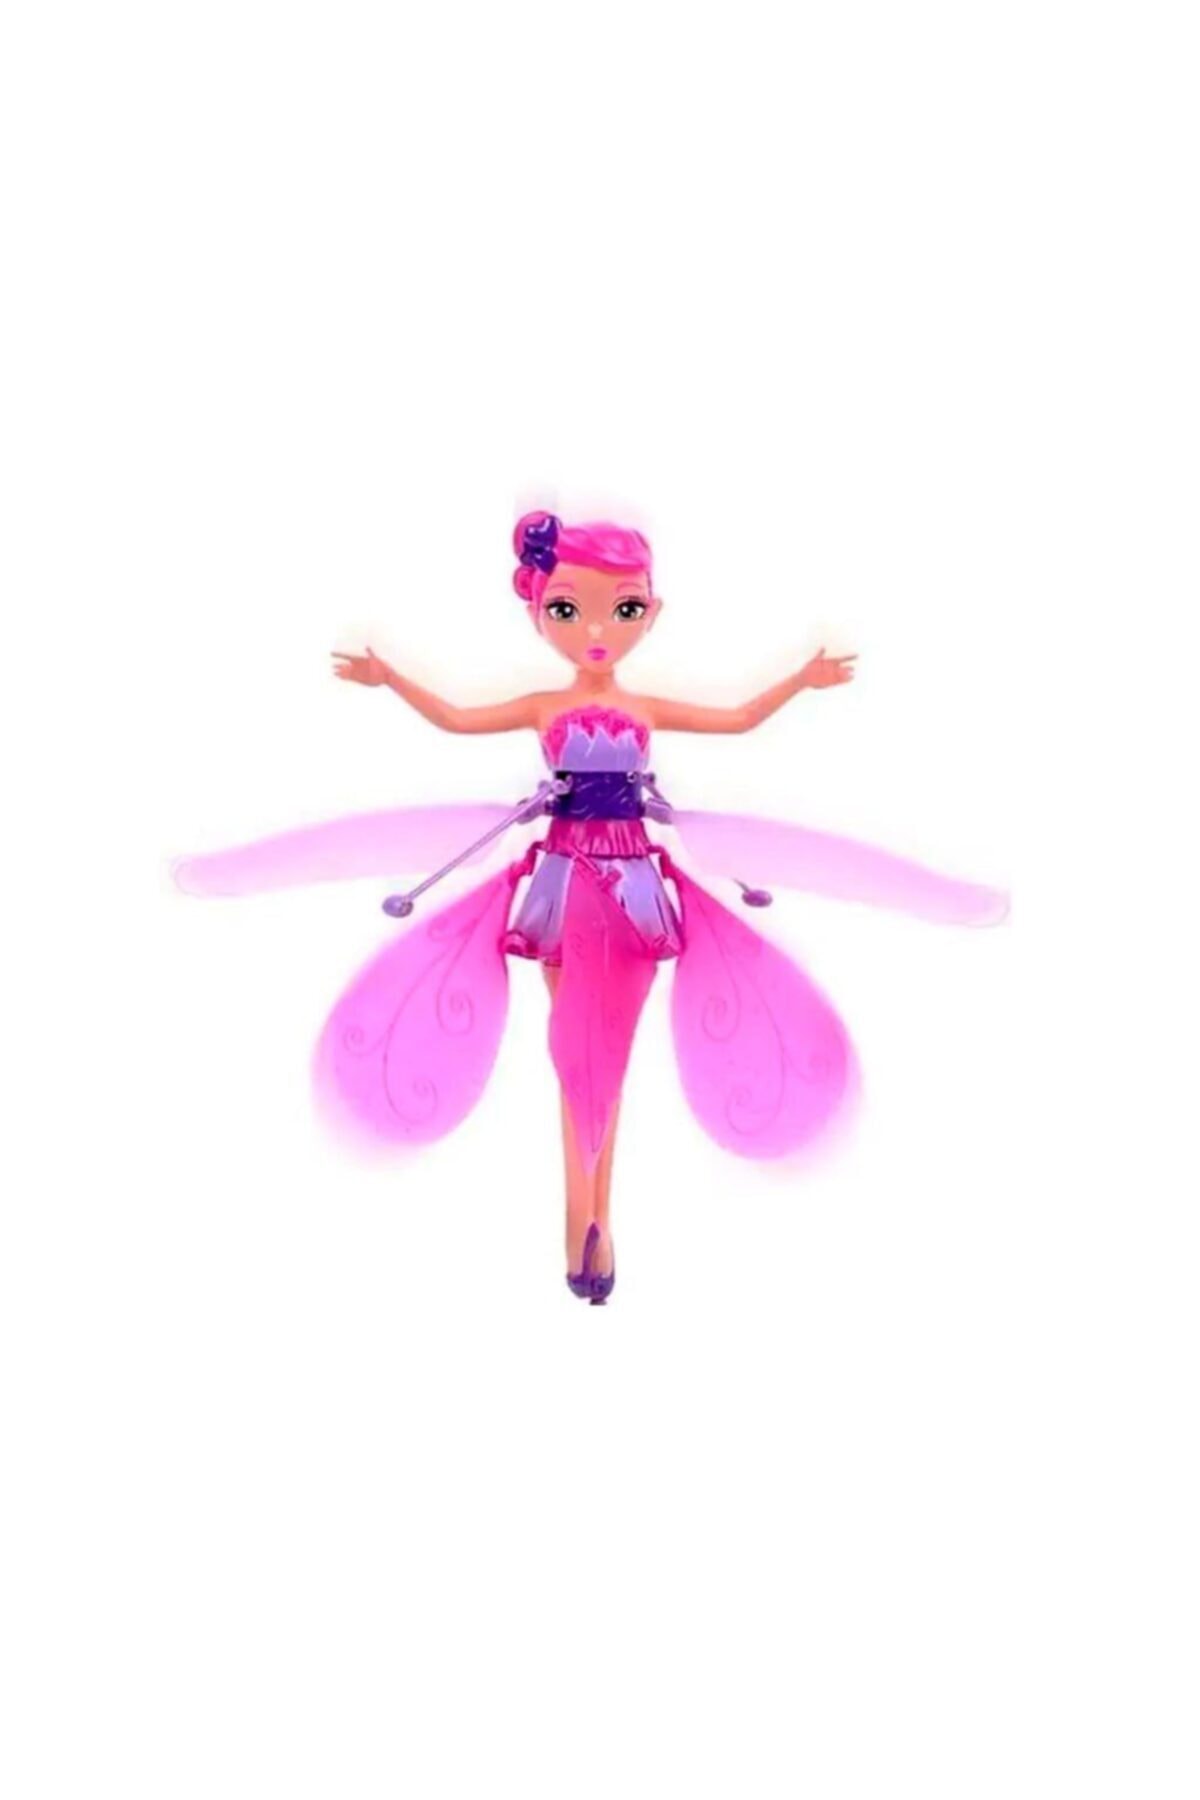 Flying-Fairy-Toy-Magic-Flying-Fairy-Pink-With-Charged-Motion-Sensor-For-Children-Kids-Girls-Fun-4.jpg